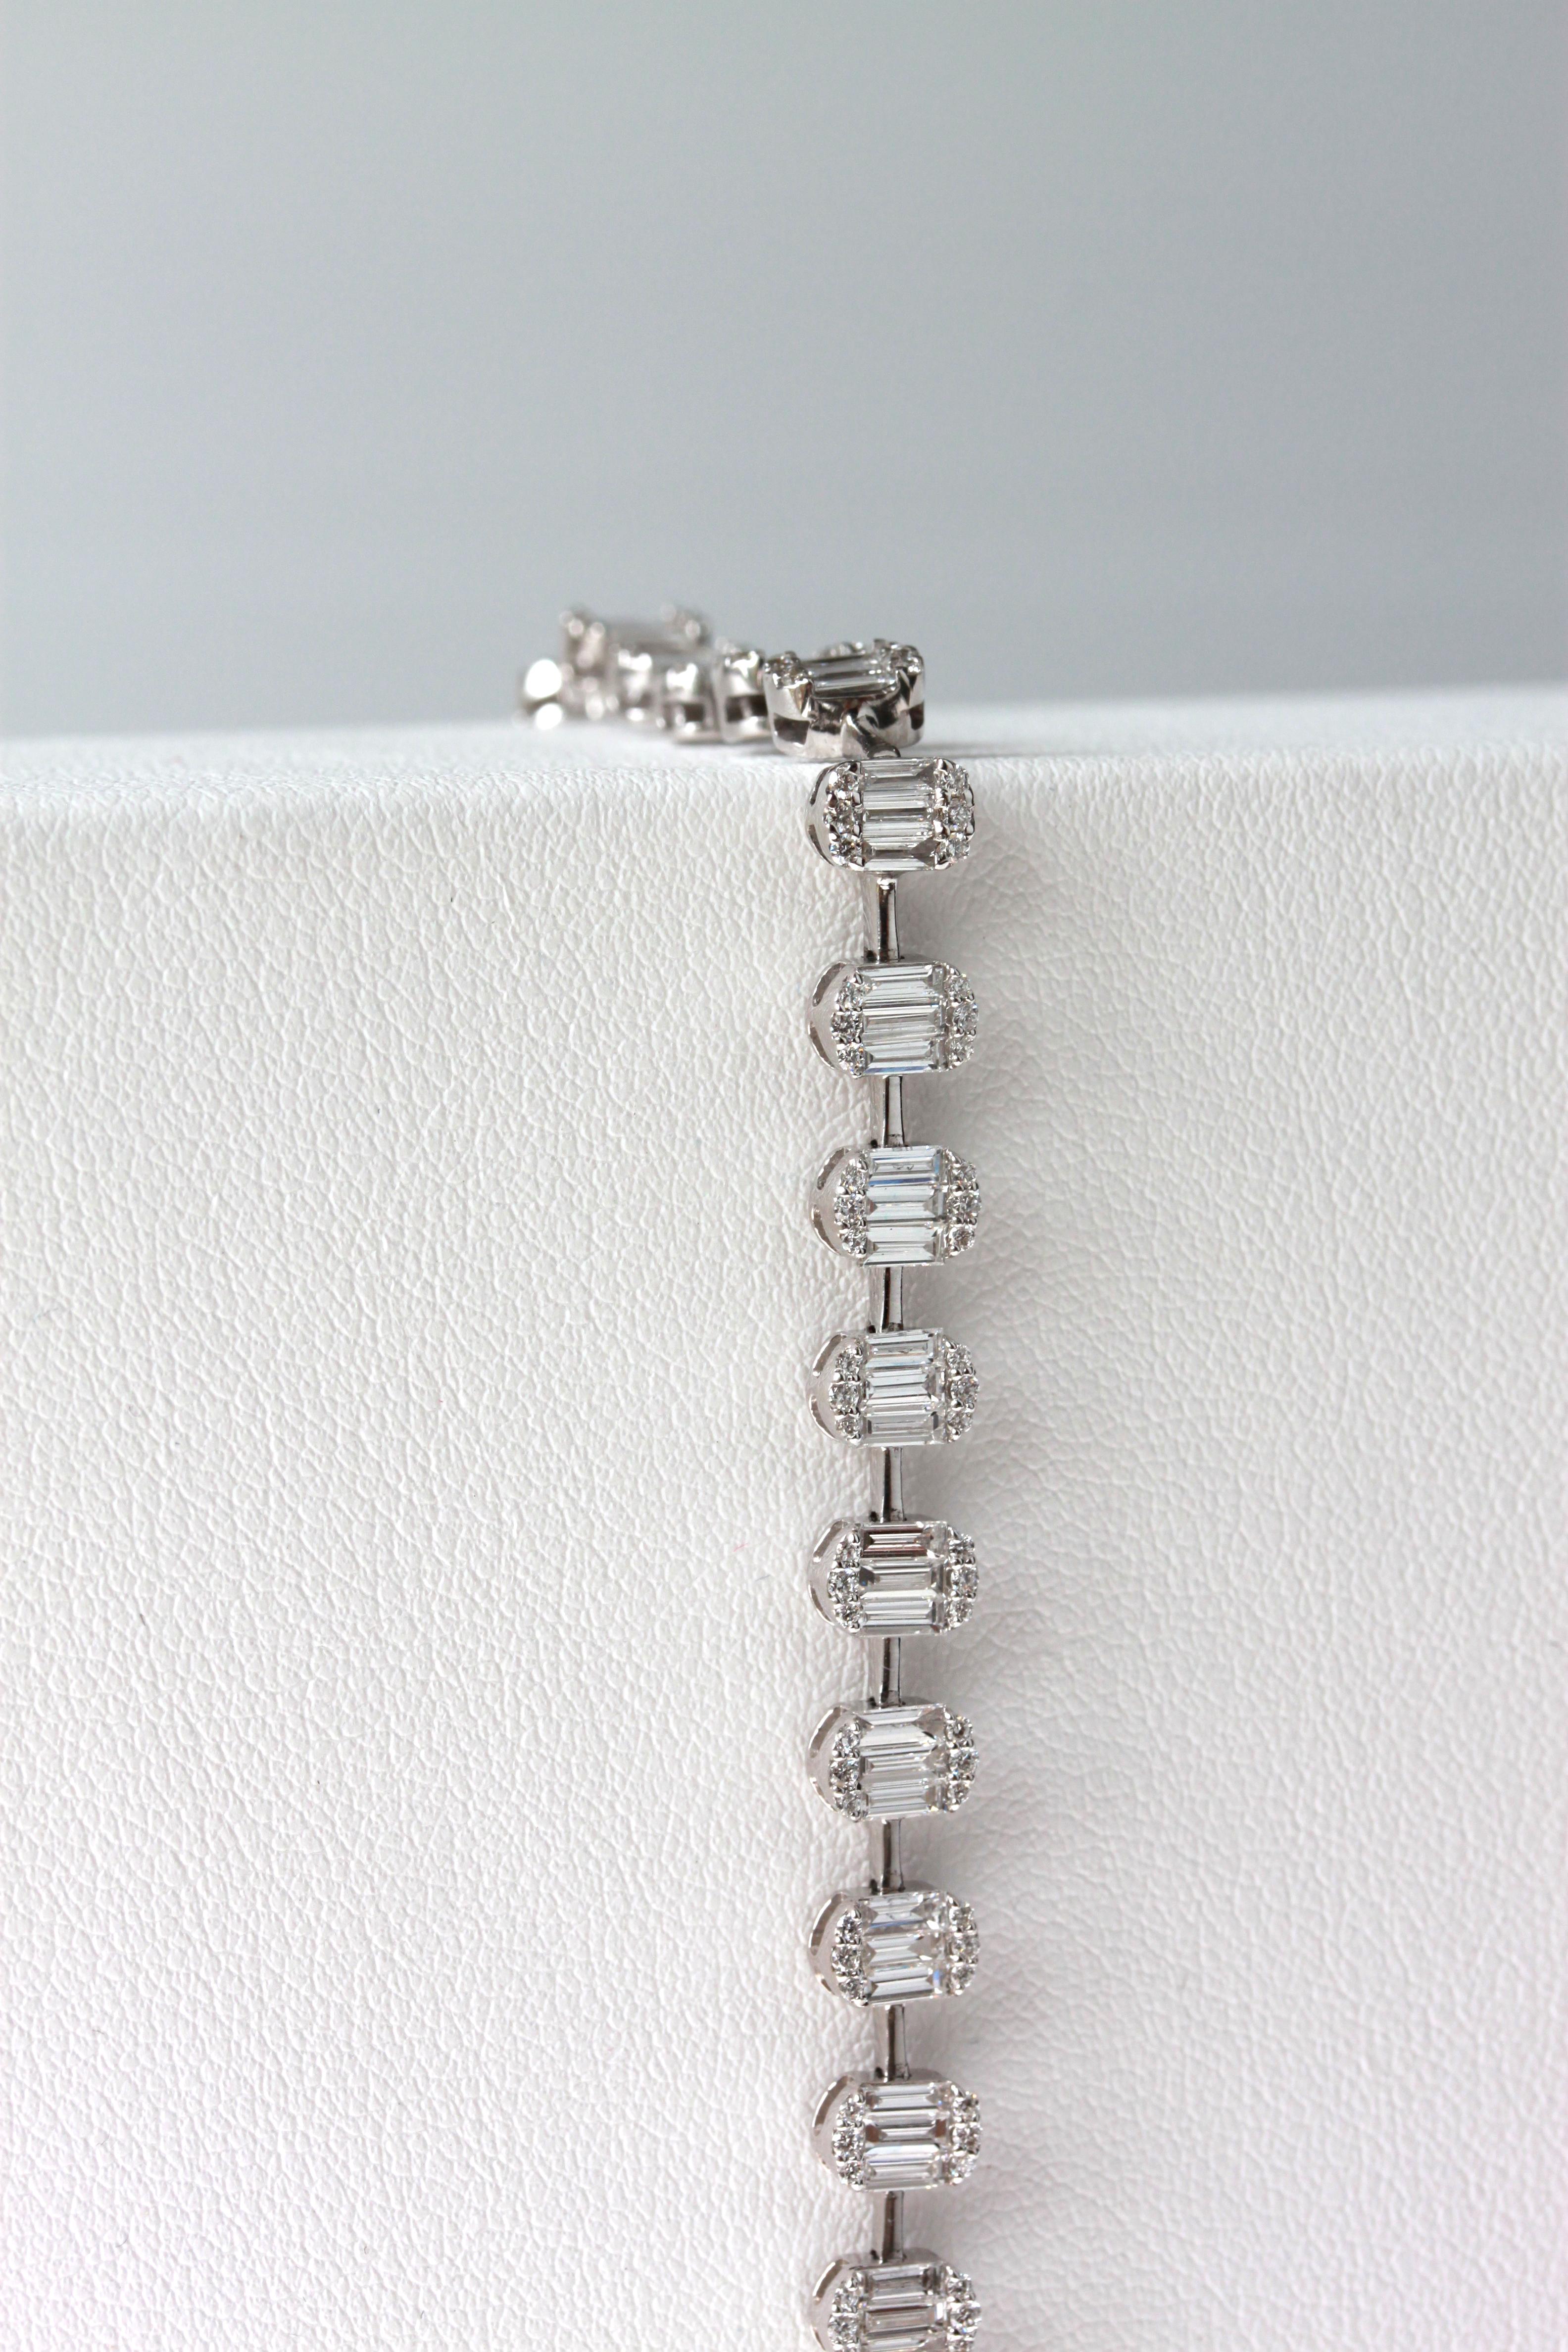 Total Weight: 8.34g
Total Diamond Weight: 3.63ct
Bracelet Length: 16 cm
Height of one illusion oval : 0.59cm

This stunning illusion oval tennis bracelet is the perfect accessory to add a touch of elegance to any outfit. The bracelet is made of